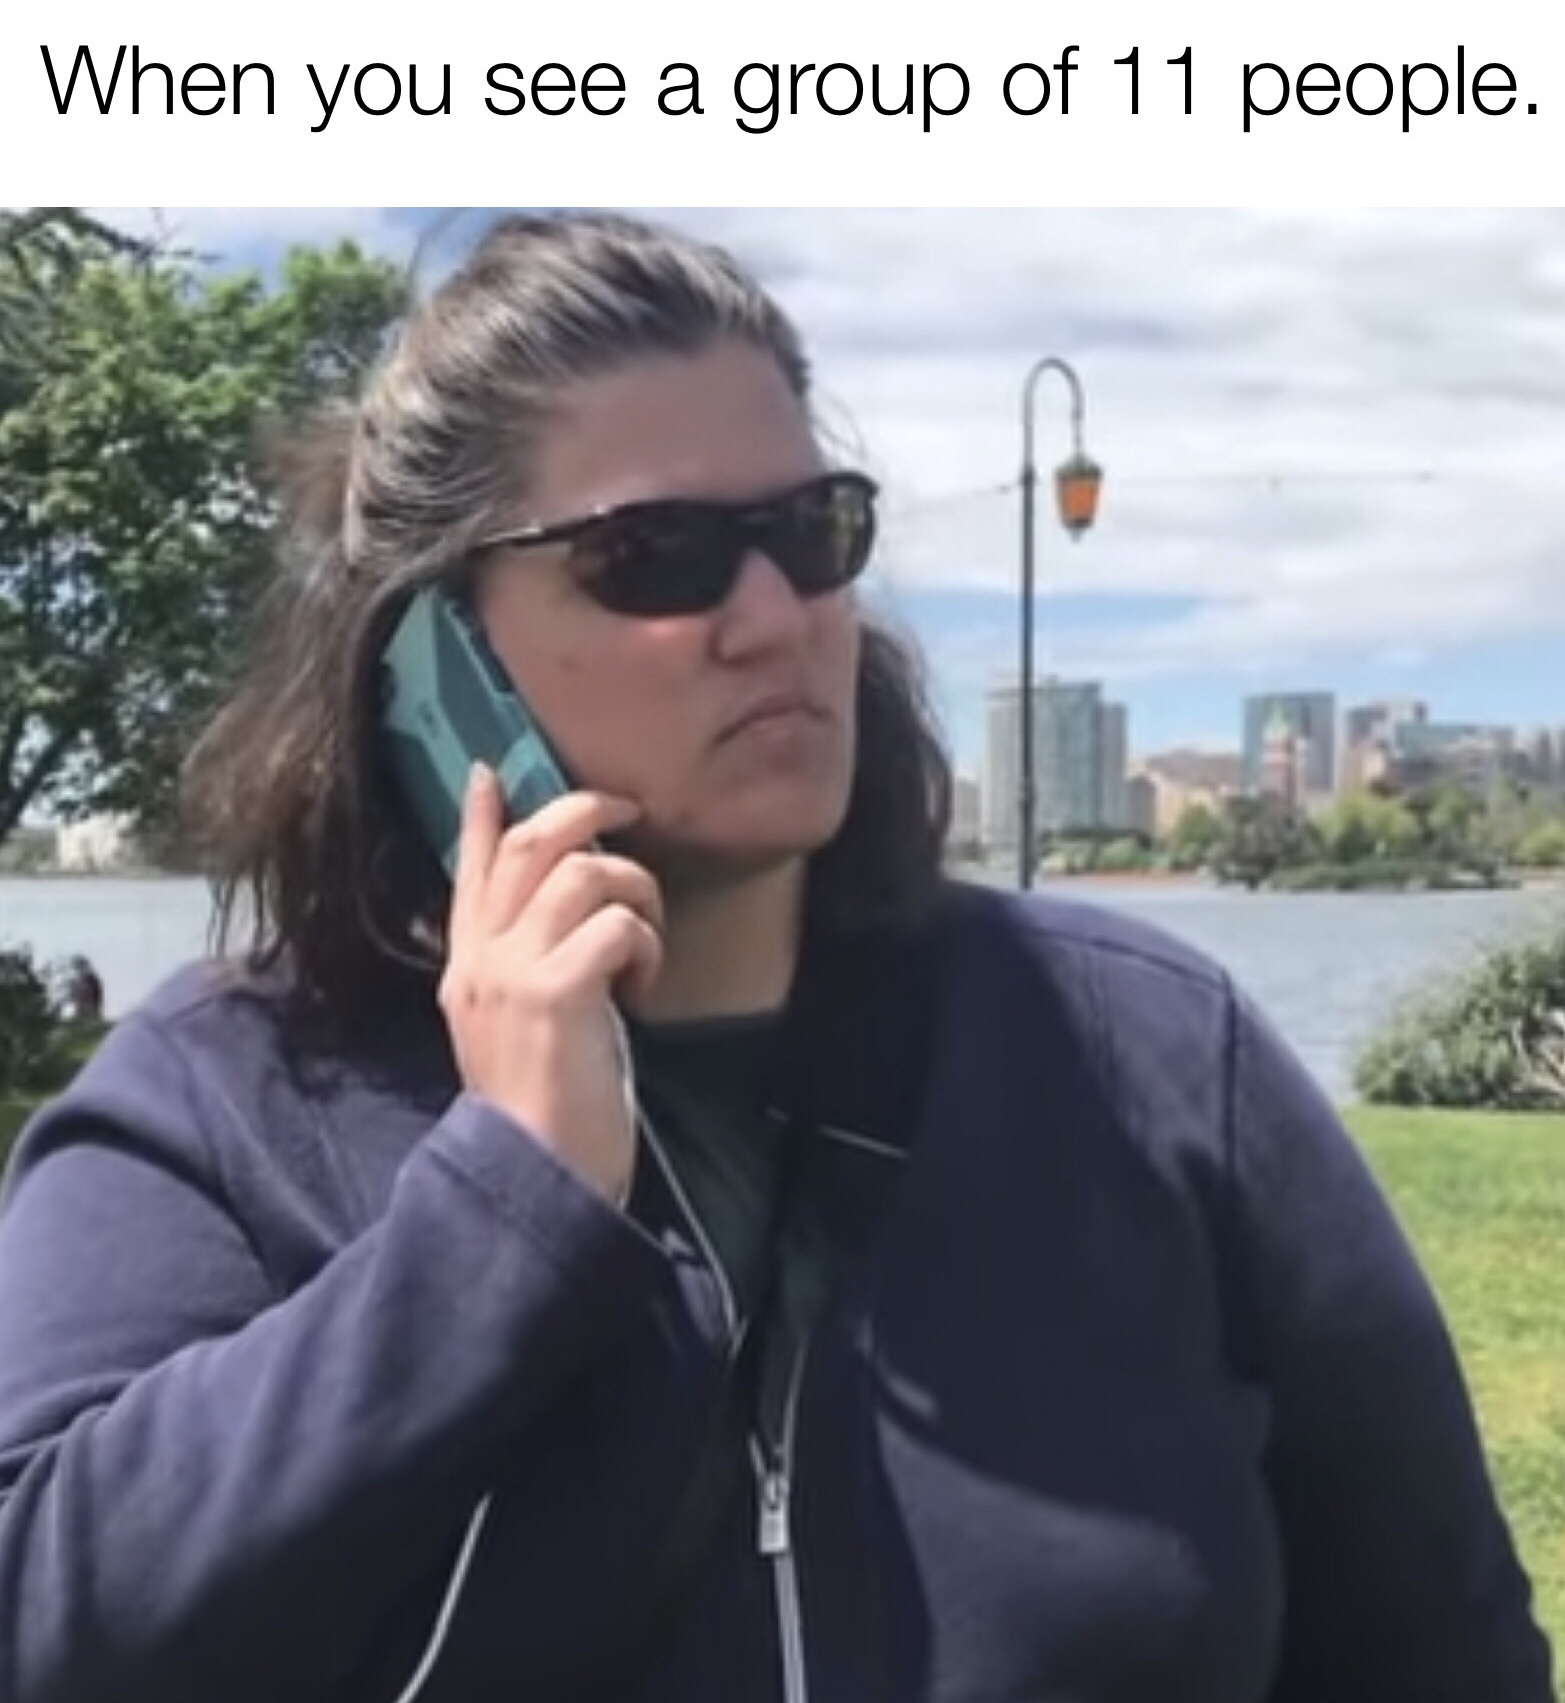 6nitch9ine memes - When you see a group of 11 people.